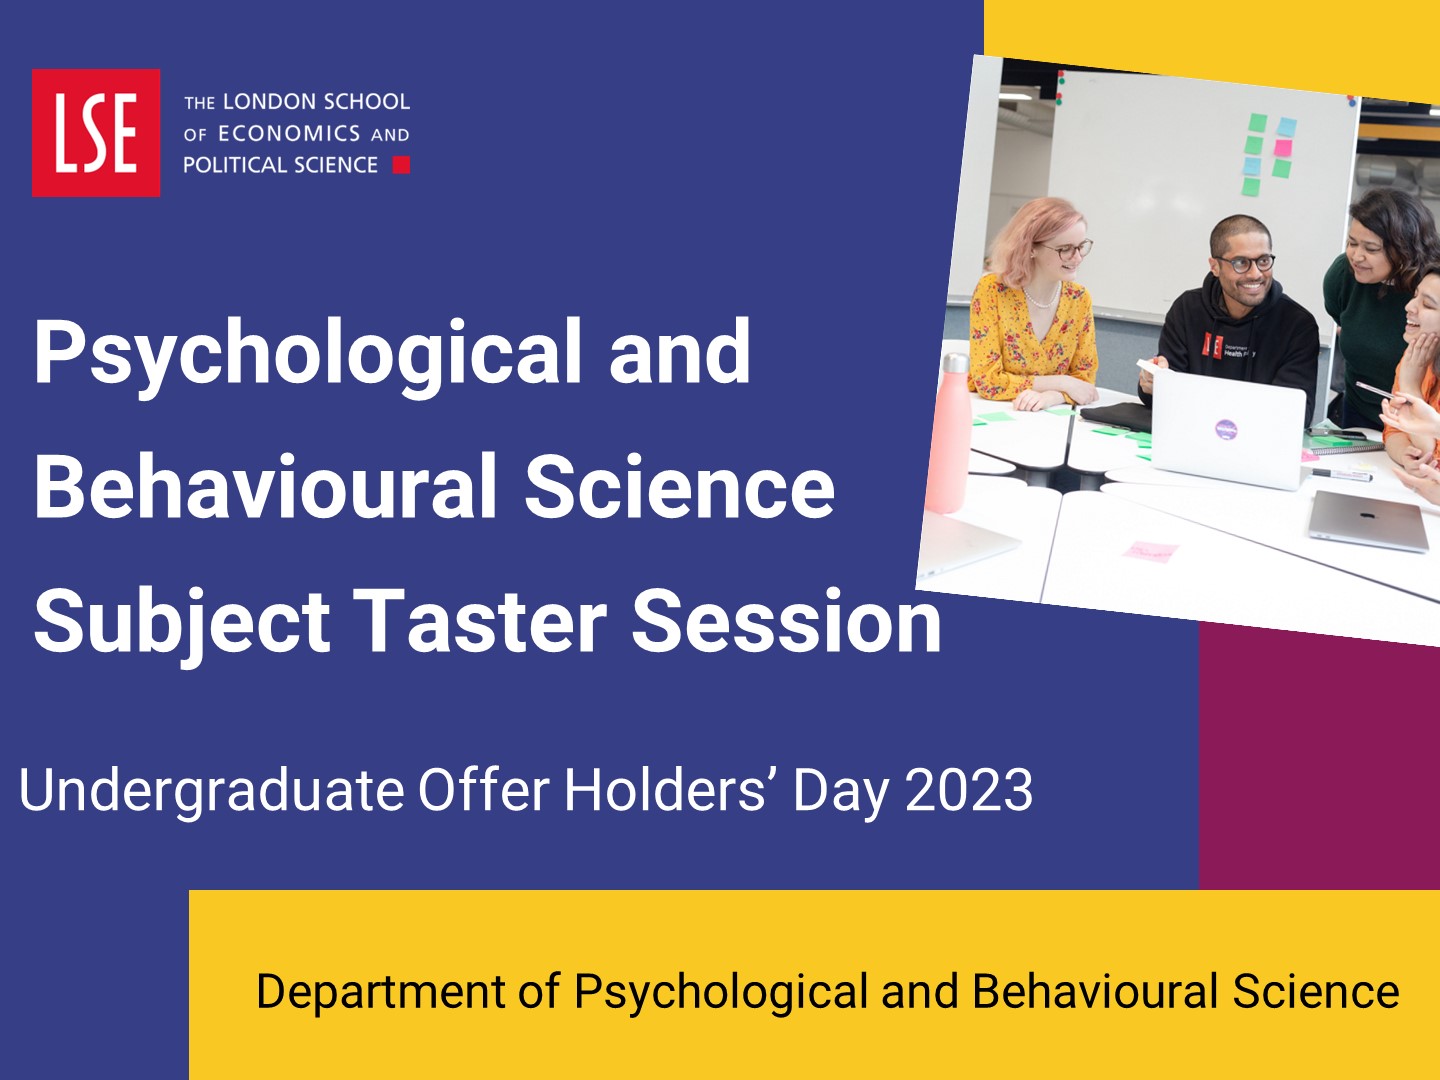 Watch the psychological and behavioural science subject taster session